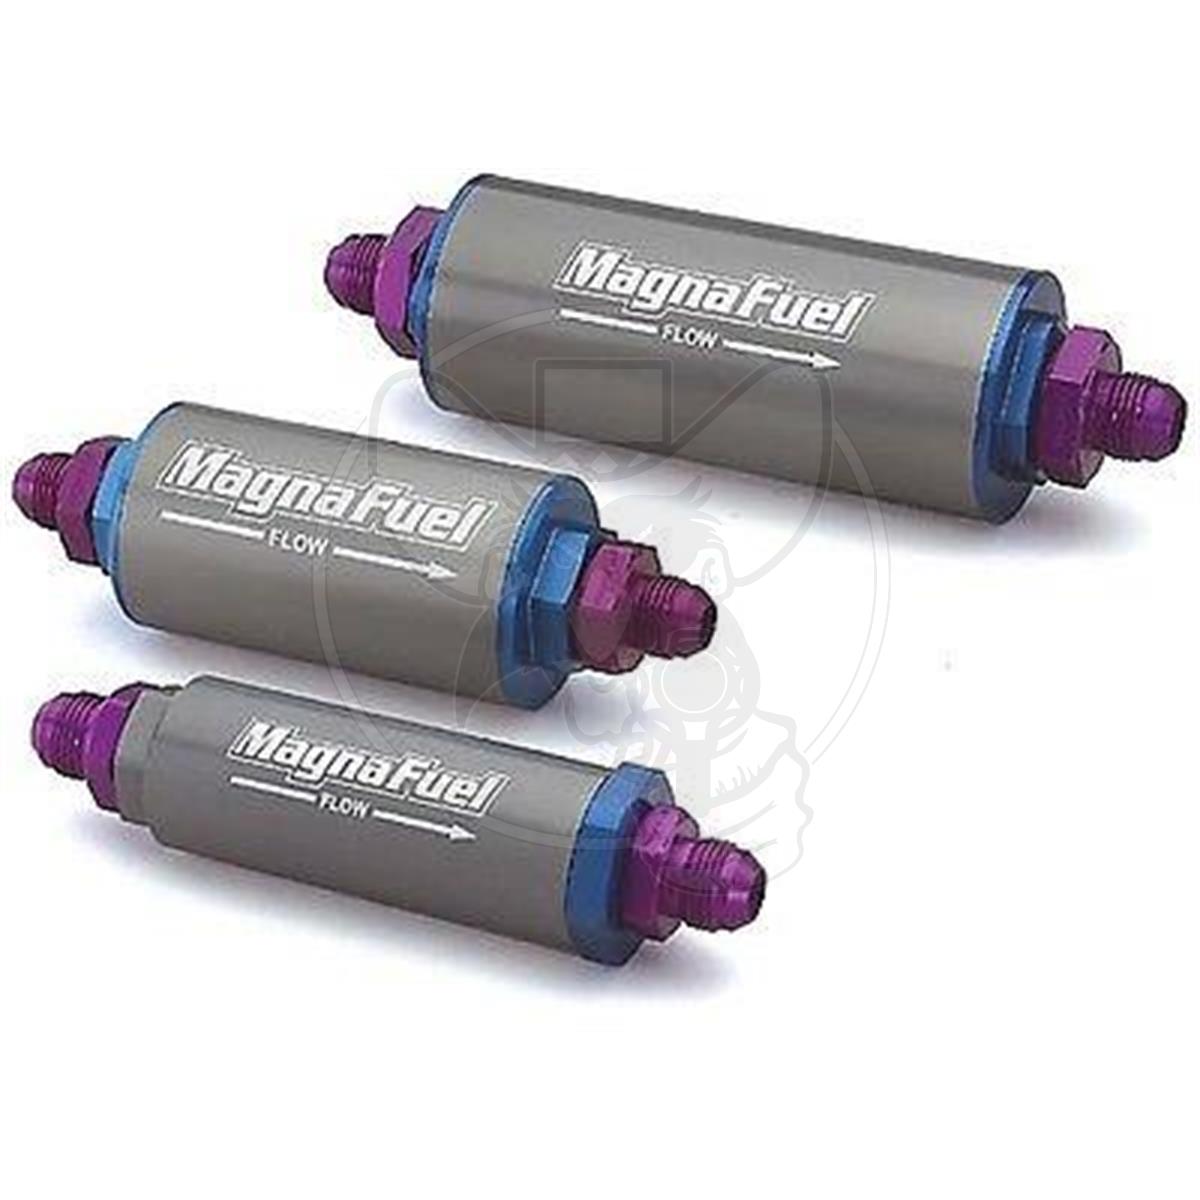 MP-7008 MAGNAFUEL FUEL FILTER -10 IN LINE 25 MICRON FOR AFTER PUMP MNT